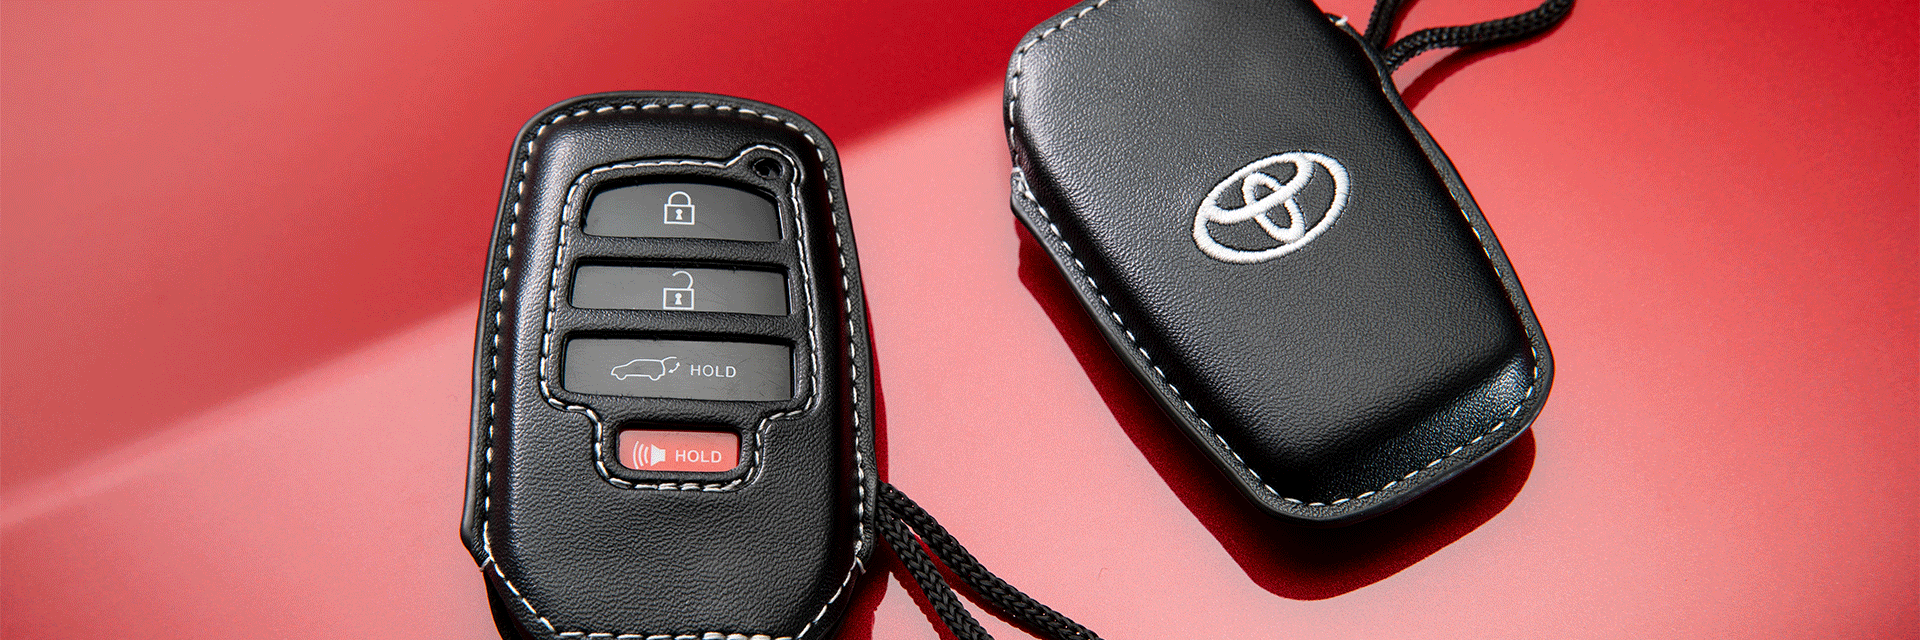 High Cost of Replacing a Car Key | Bobby Rahal Toyota | Two 2022 Toyota Corolla Cross Key Gloves on Red Background